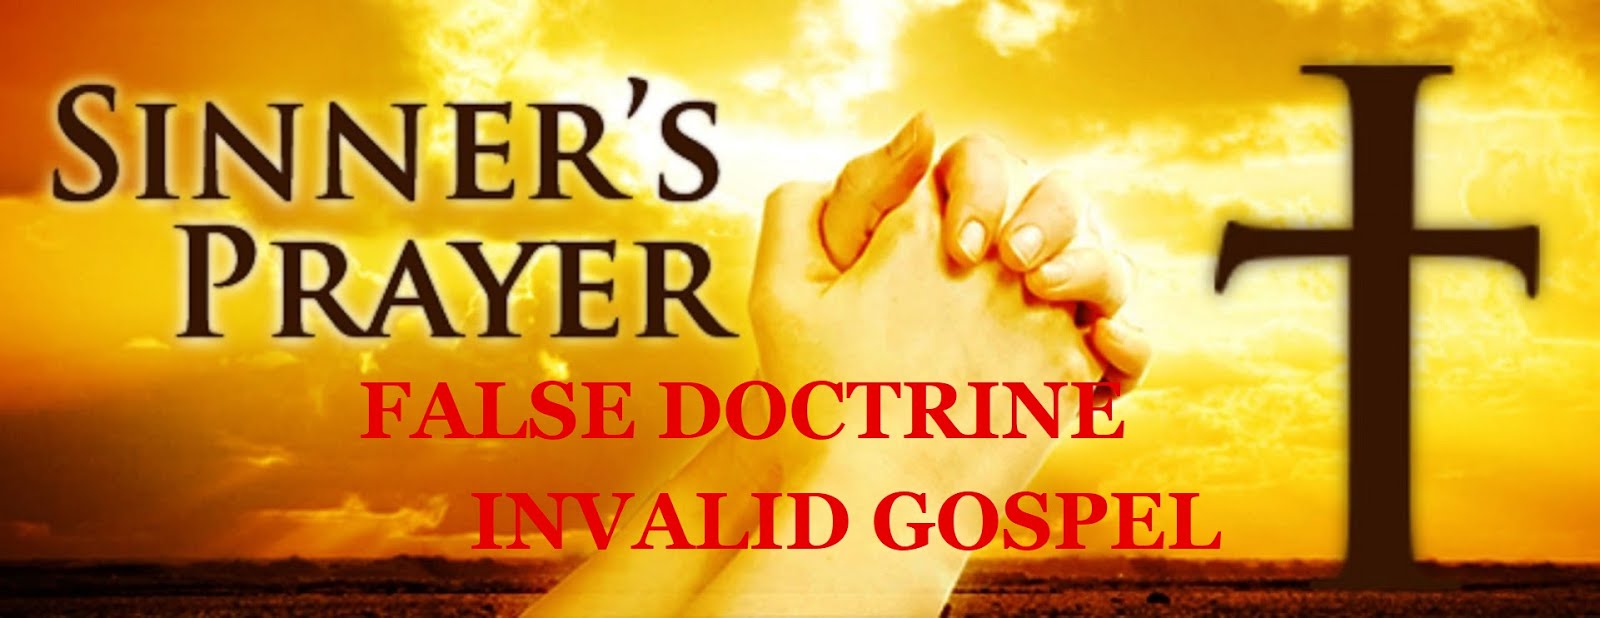 SINNER'S PRAYER - A SATANIC TWIST OF THE REAL DOCTRINE OF SALVATION FOUND IN ACTS 2:38